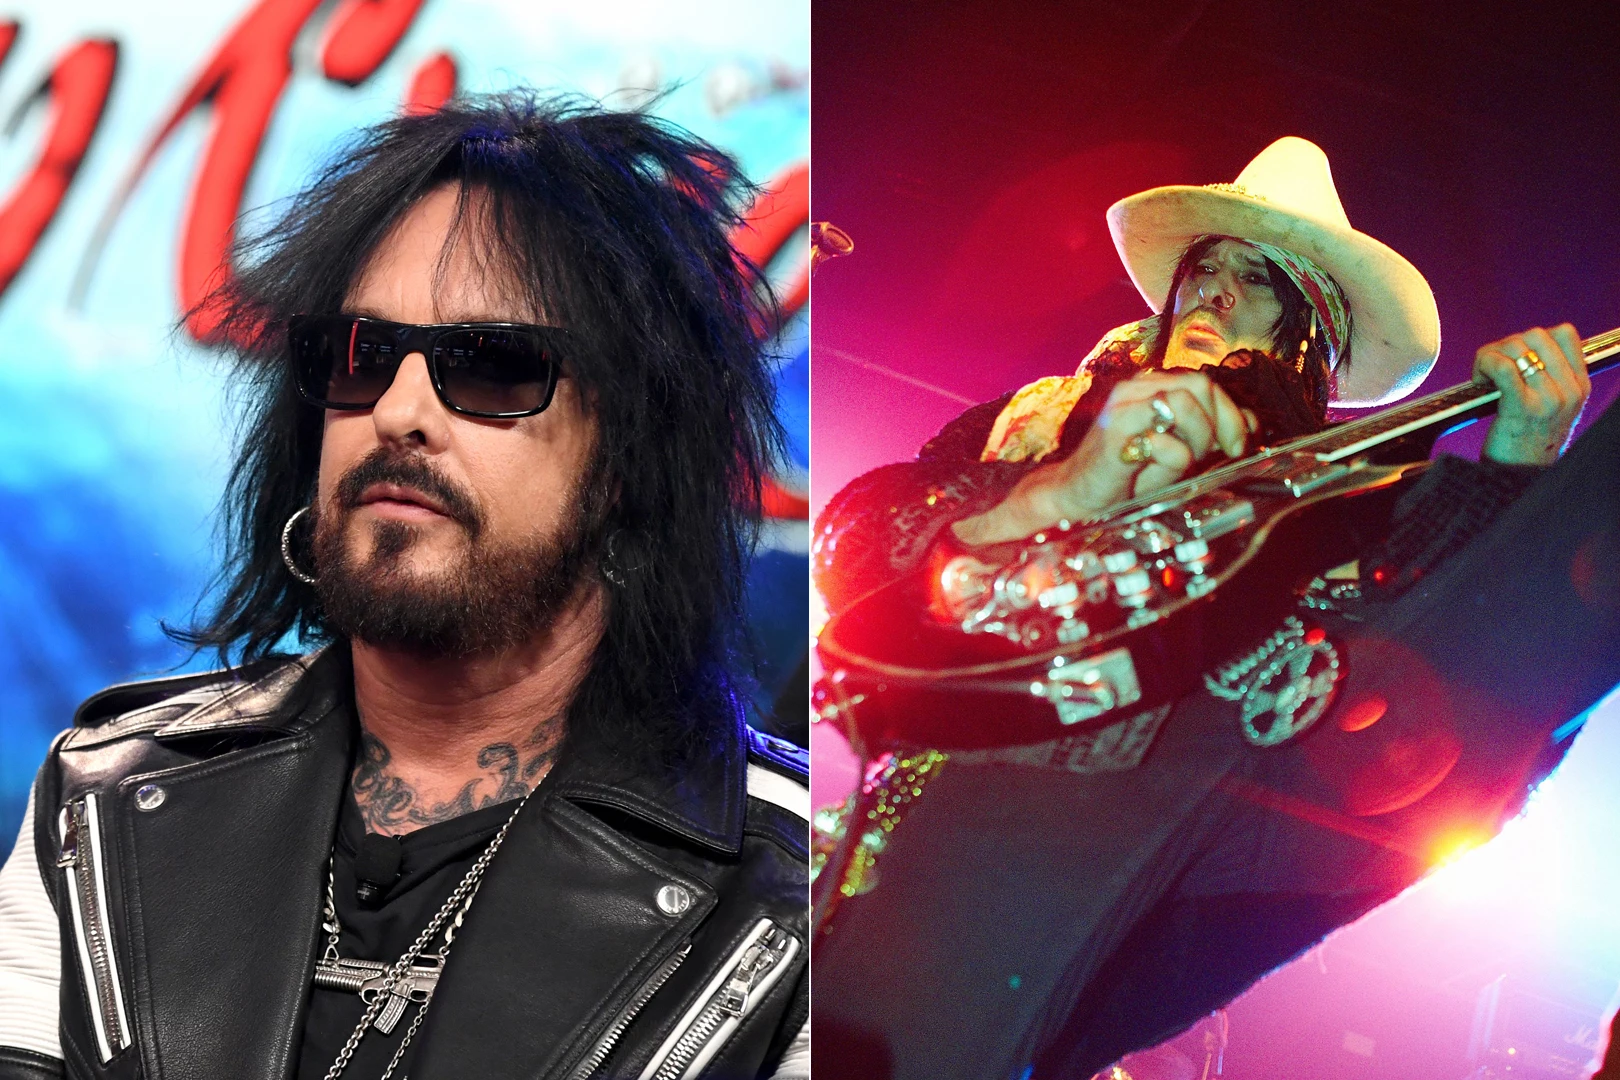 Nikki Sixx - I Also 'Never Thanked' McCoy for Getting Me Drugs